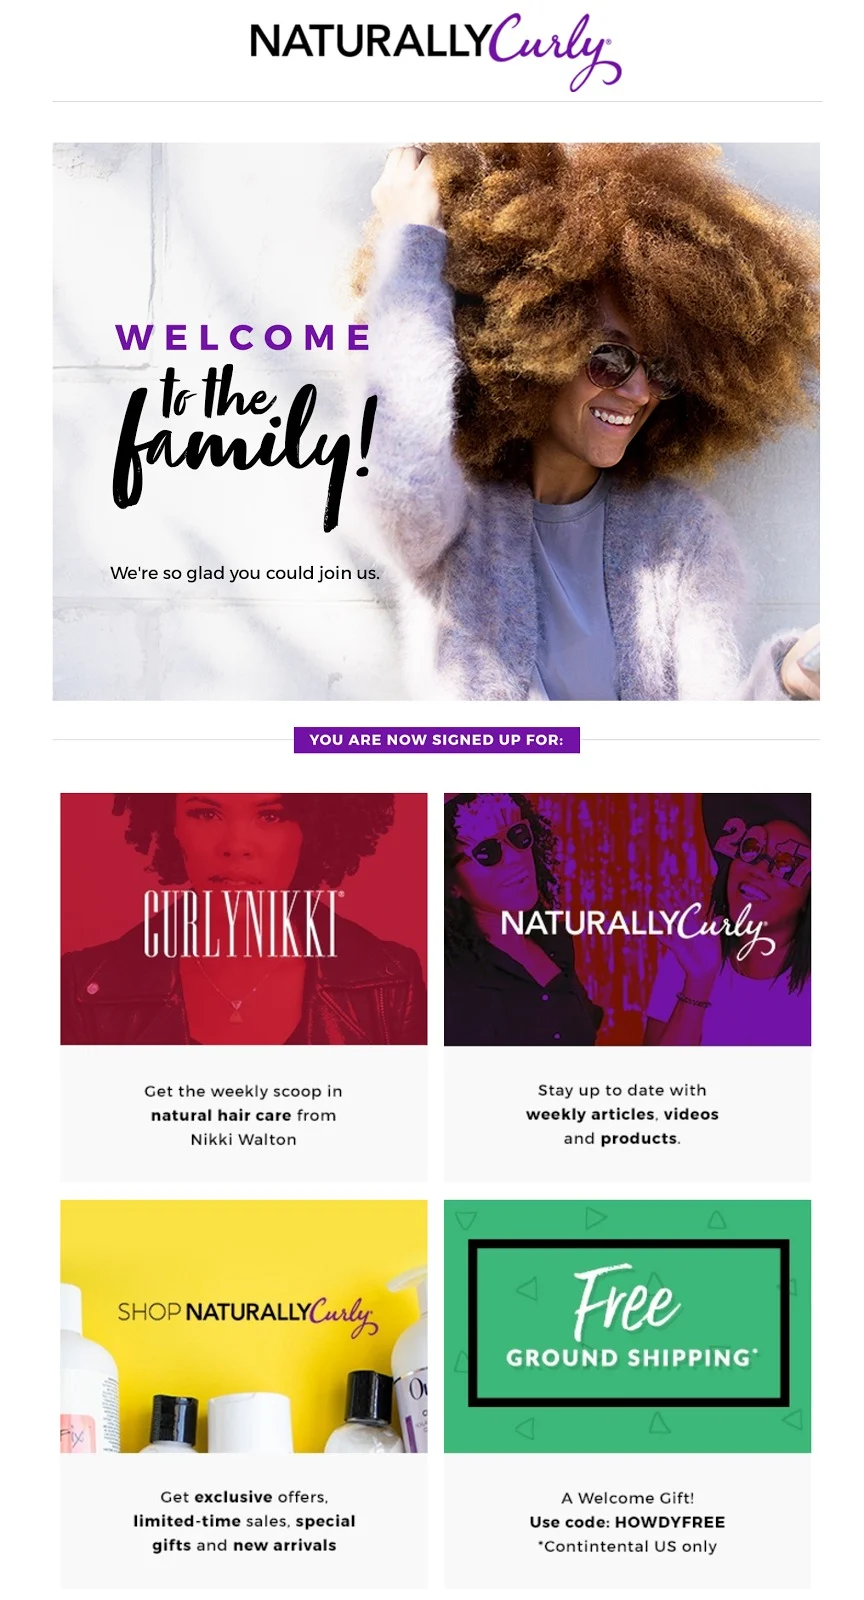 https://bcwpmktg.wpengine.com/wp-content/uploads/2017/08/welcome-email-template-example-naturallycurly.jpg